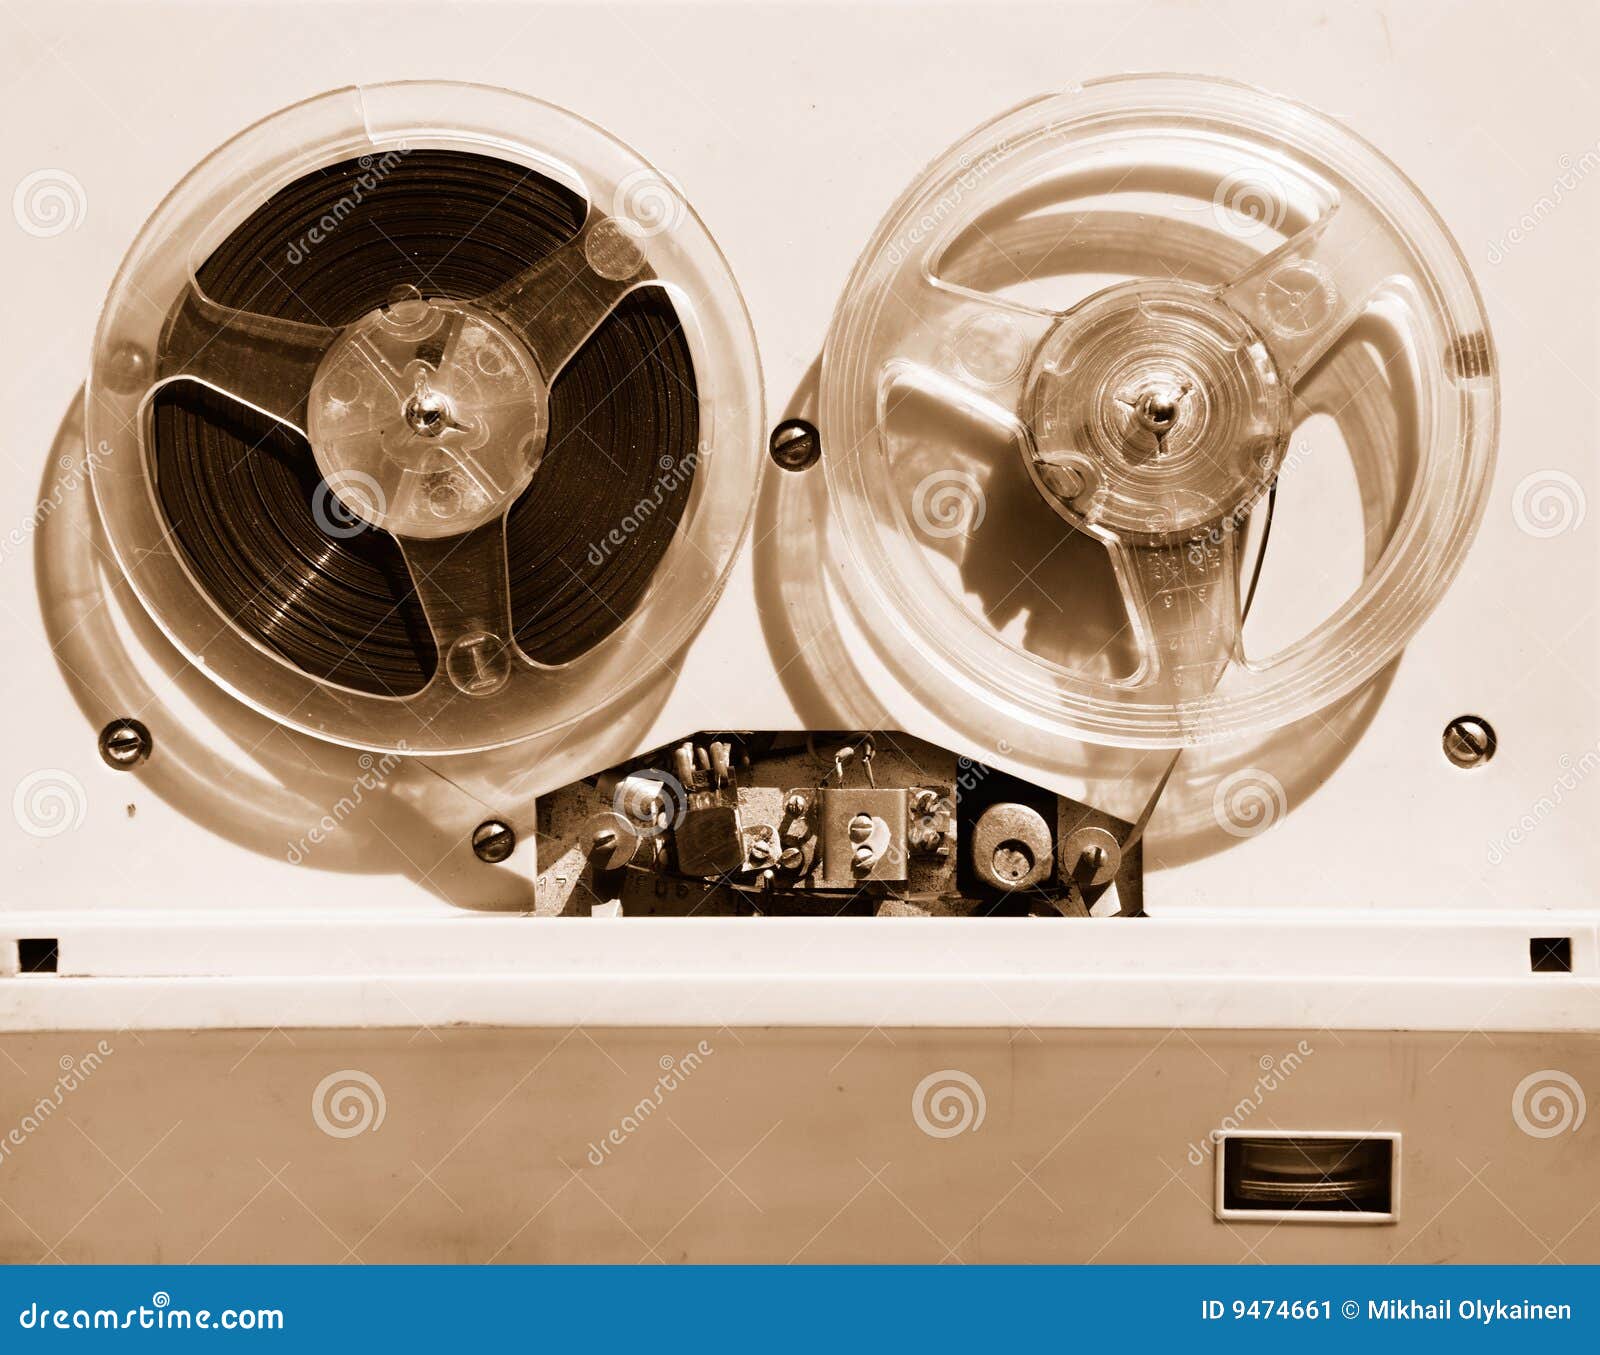 11,495 Old Tape Recorder Stock Photos - Free & Royalty-Free Stock